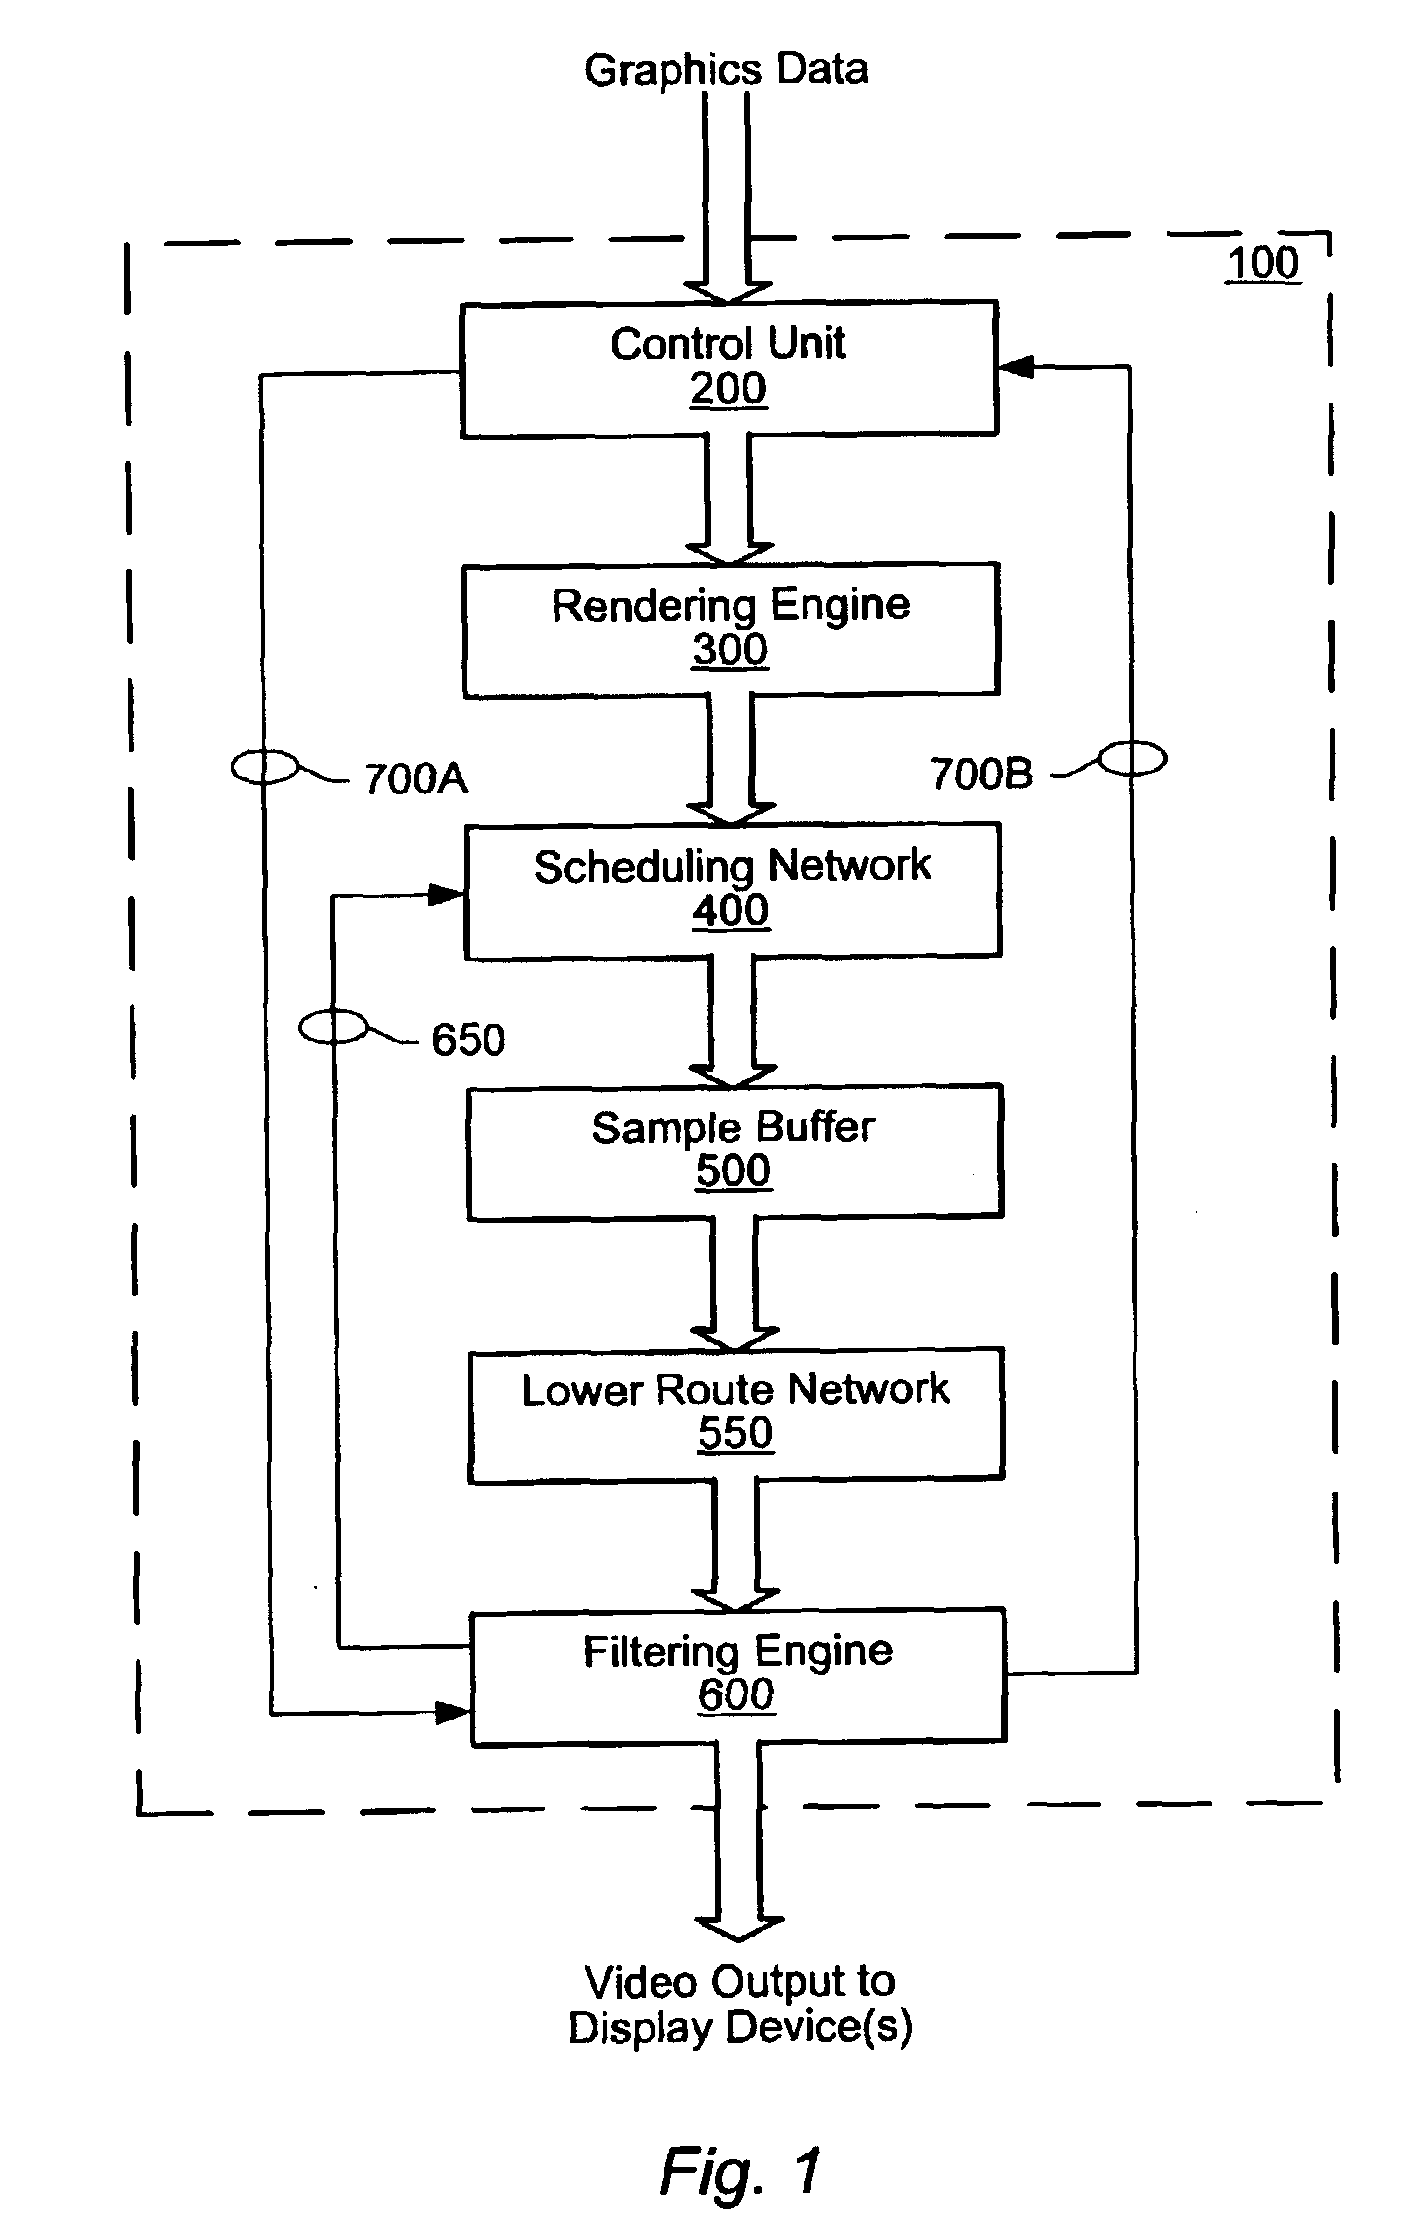 Design for a non-blocking cache for texture mapping